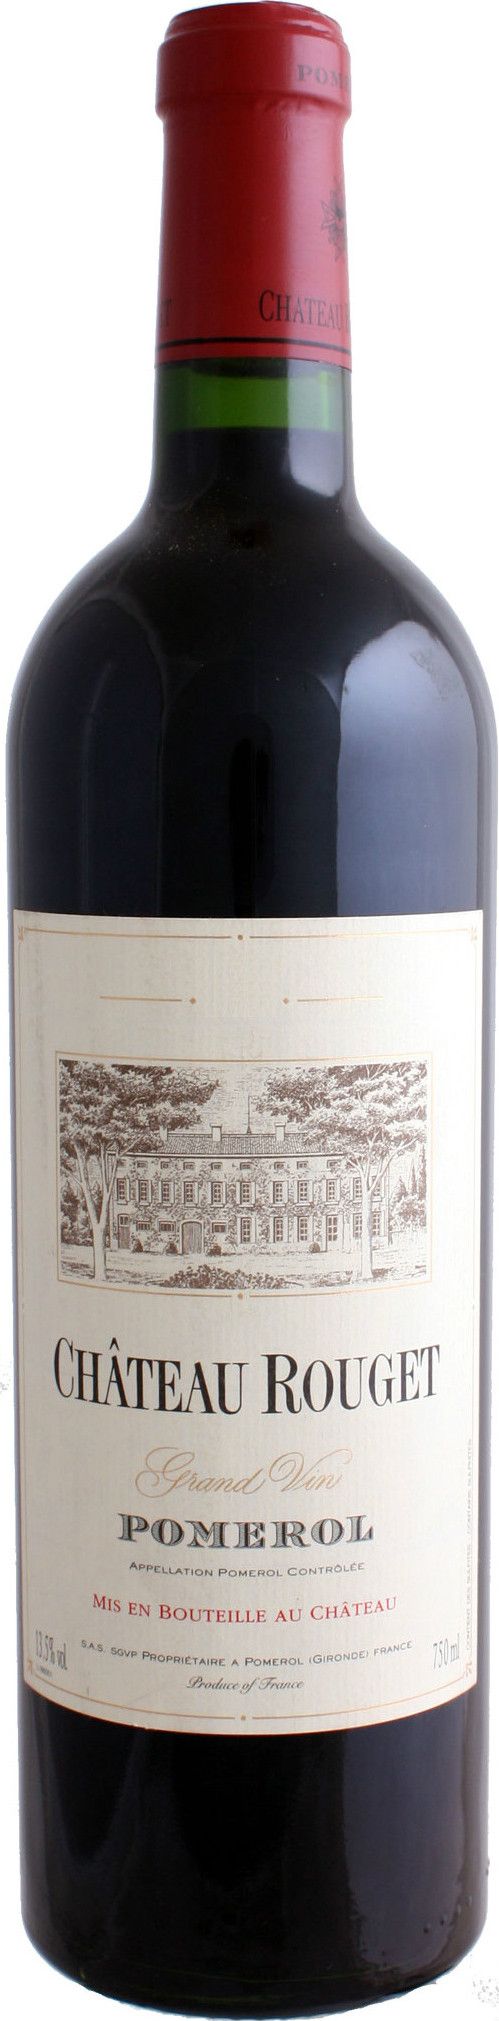 Chateau Rouget, 2007